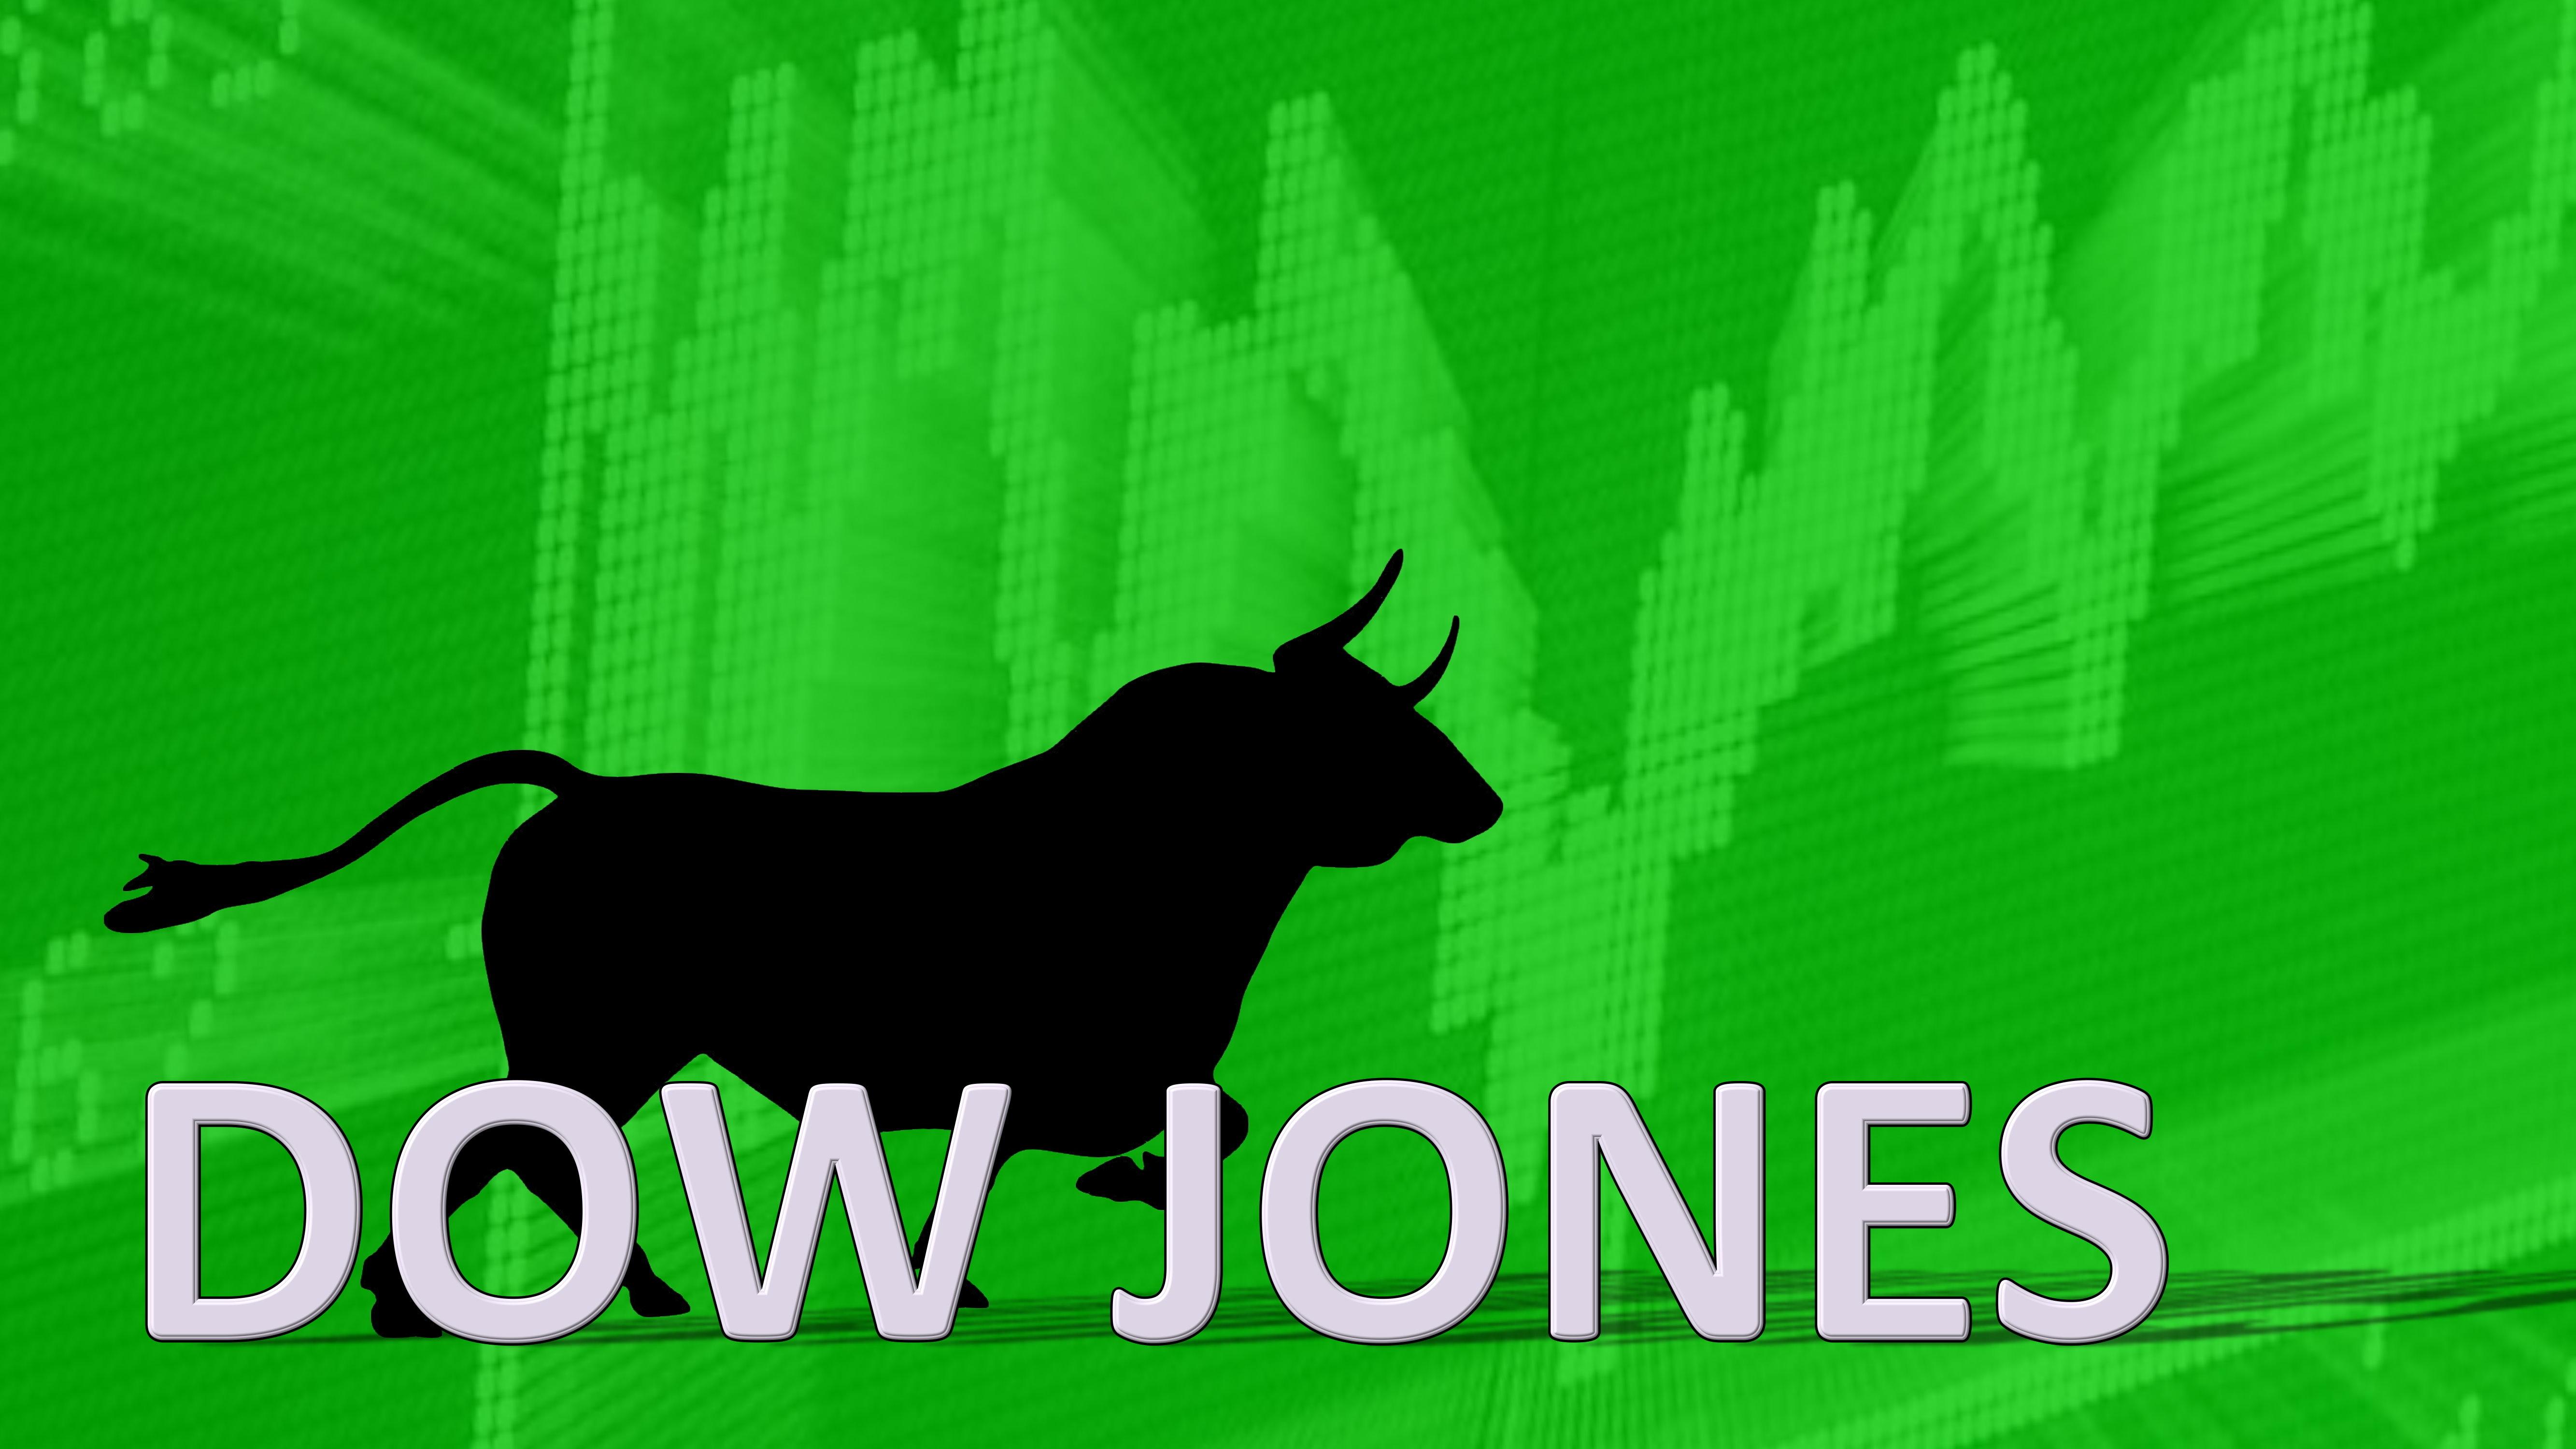 dow-jones-2020-outlook-what-s-next-after-trade-deal